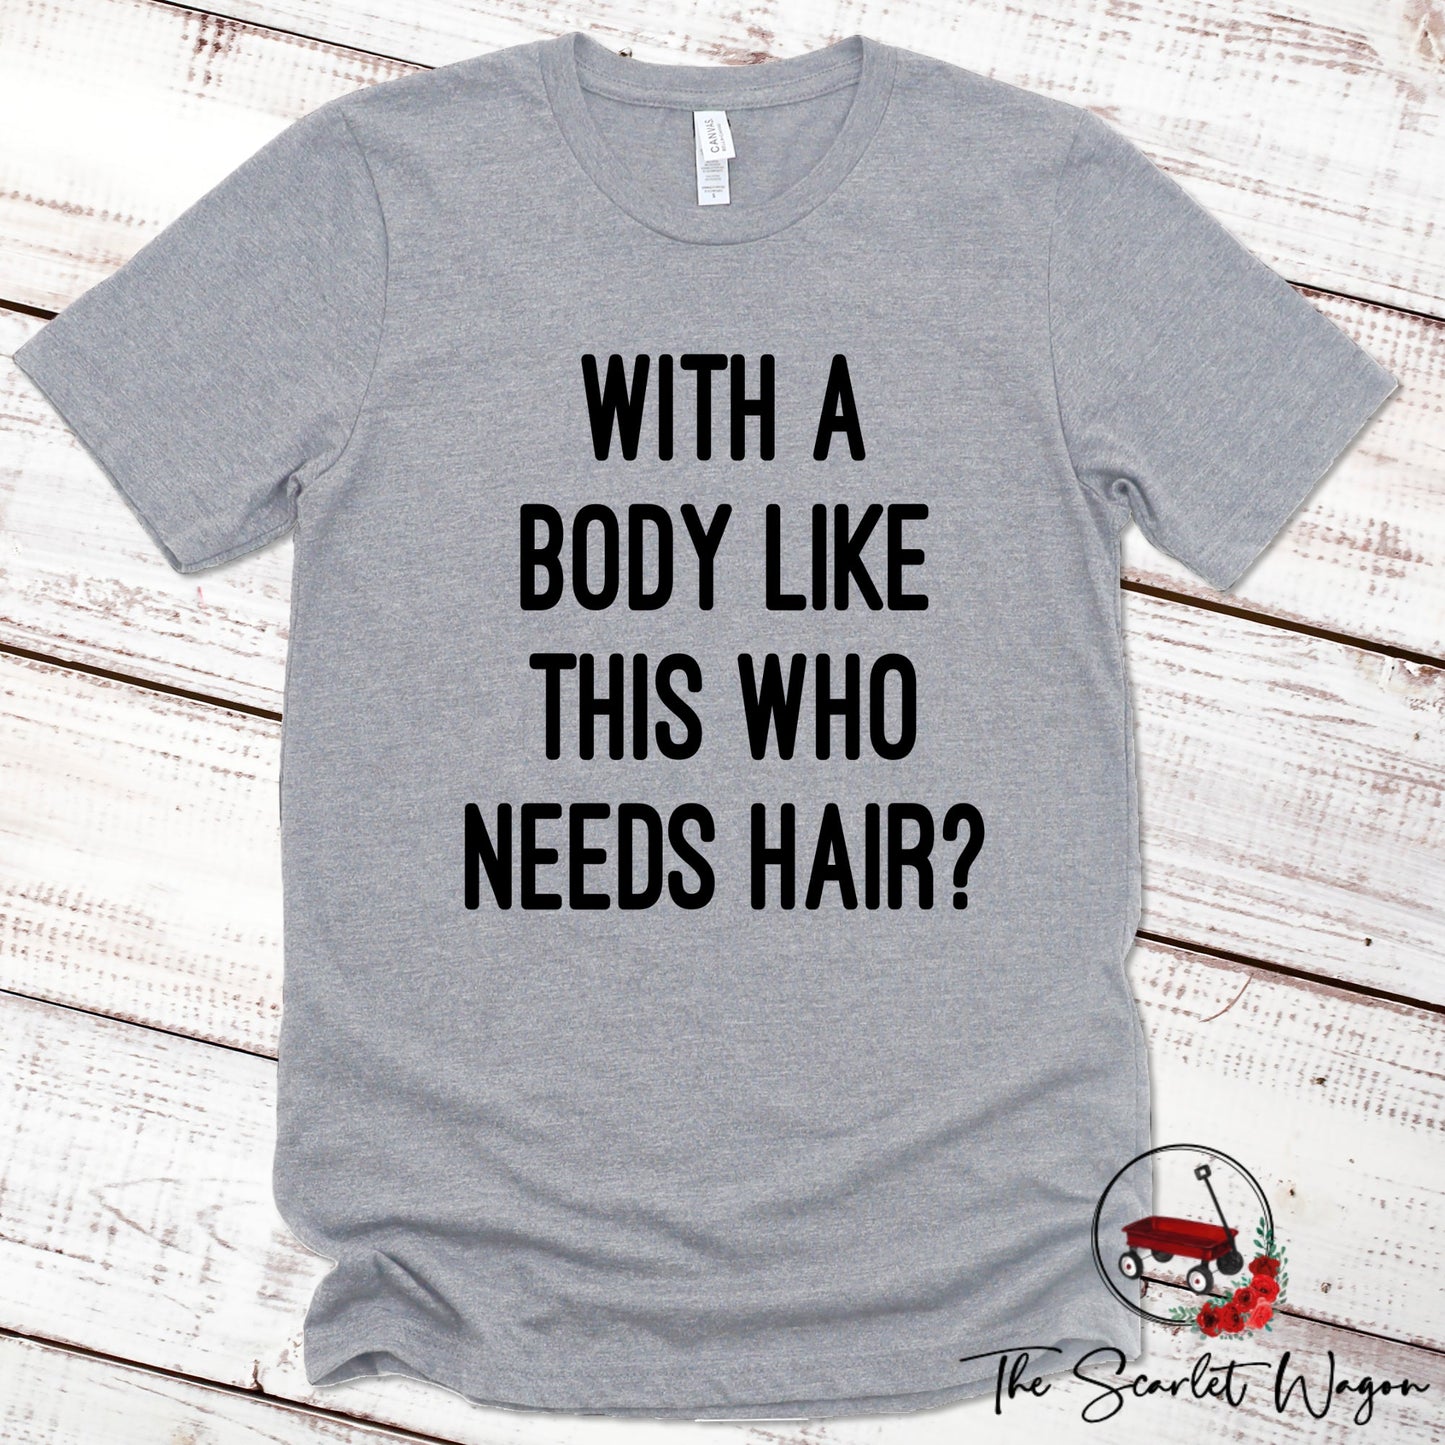 With a Body Like This Who Needs Hair Premium Tee Scarlet Wagon Athletic Heather XS 